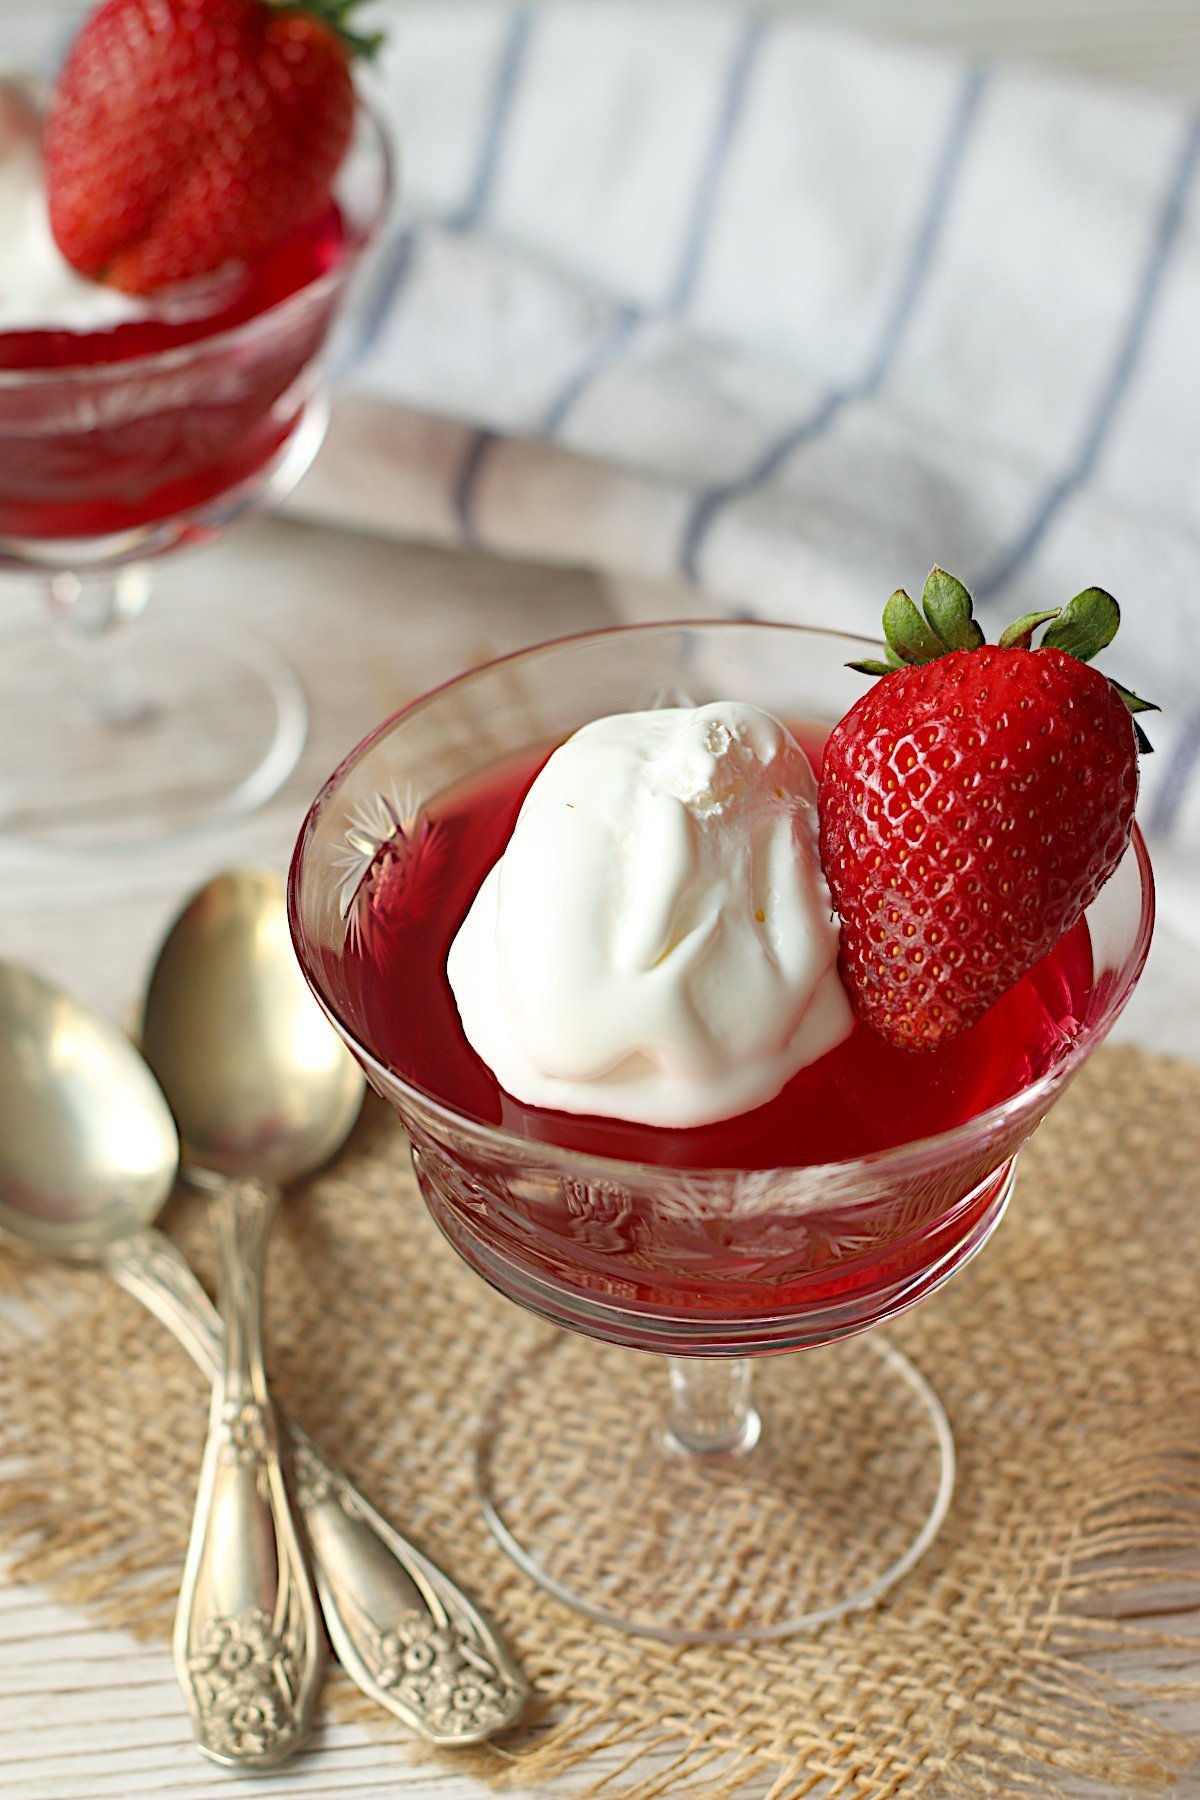 Homemade jello in a crystal glass, garnished with whipped topping and a fresh strawberry.